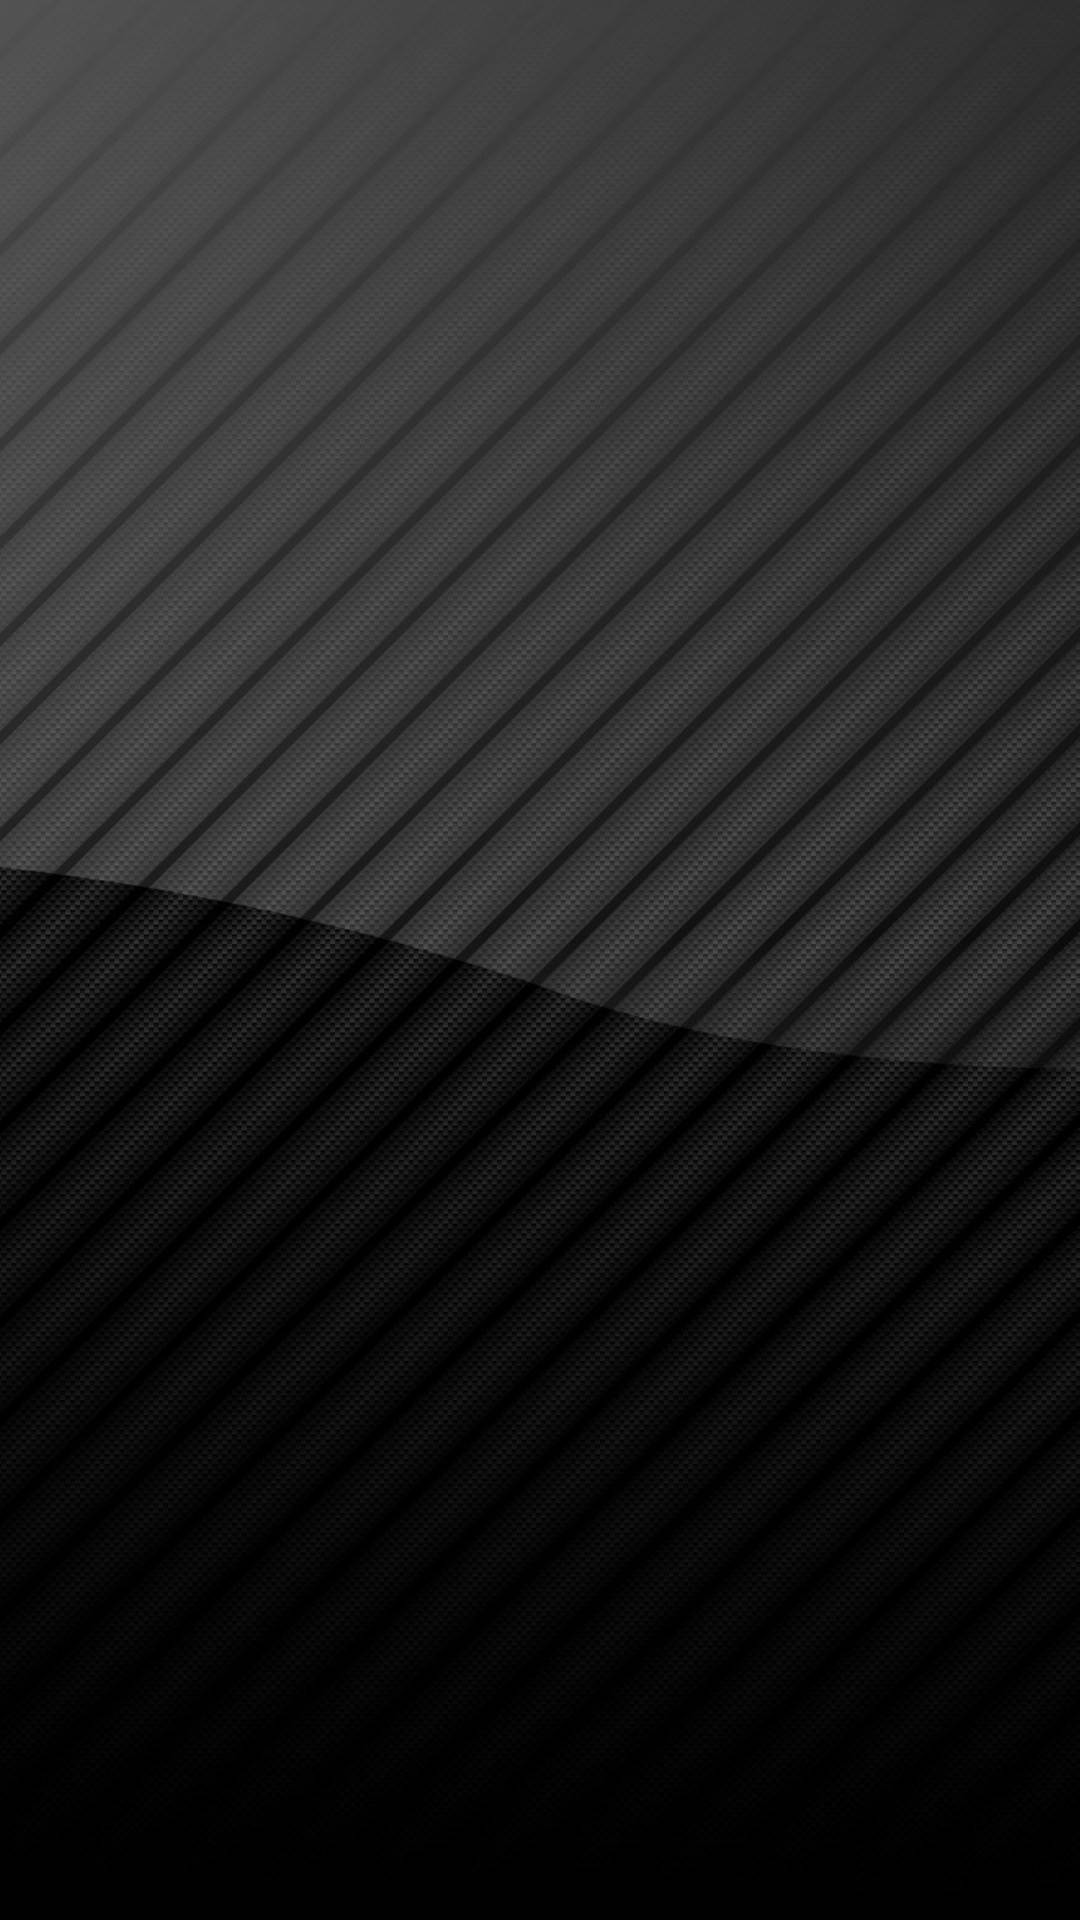 Exciting Gray Abstract Wallpaper for Samsung Galaxy S4 Wallpaper